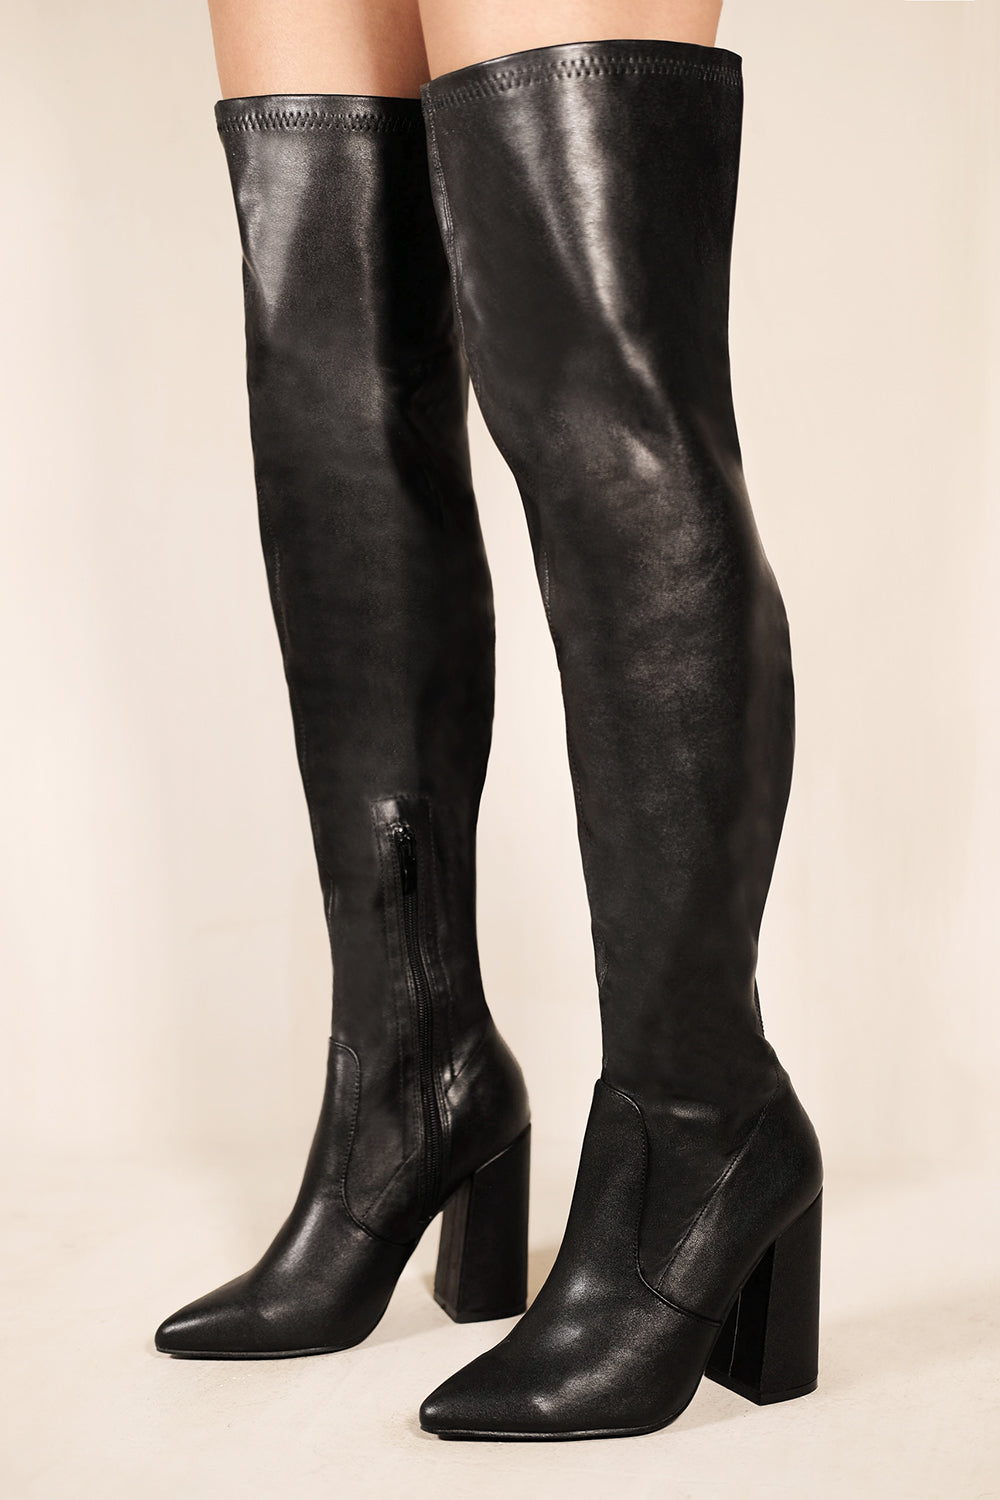 KAMRIE BLOCK HEEL KNEE HIGH BOOTS WITH POINTED TOE IN BLACK FAUX LEATHER